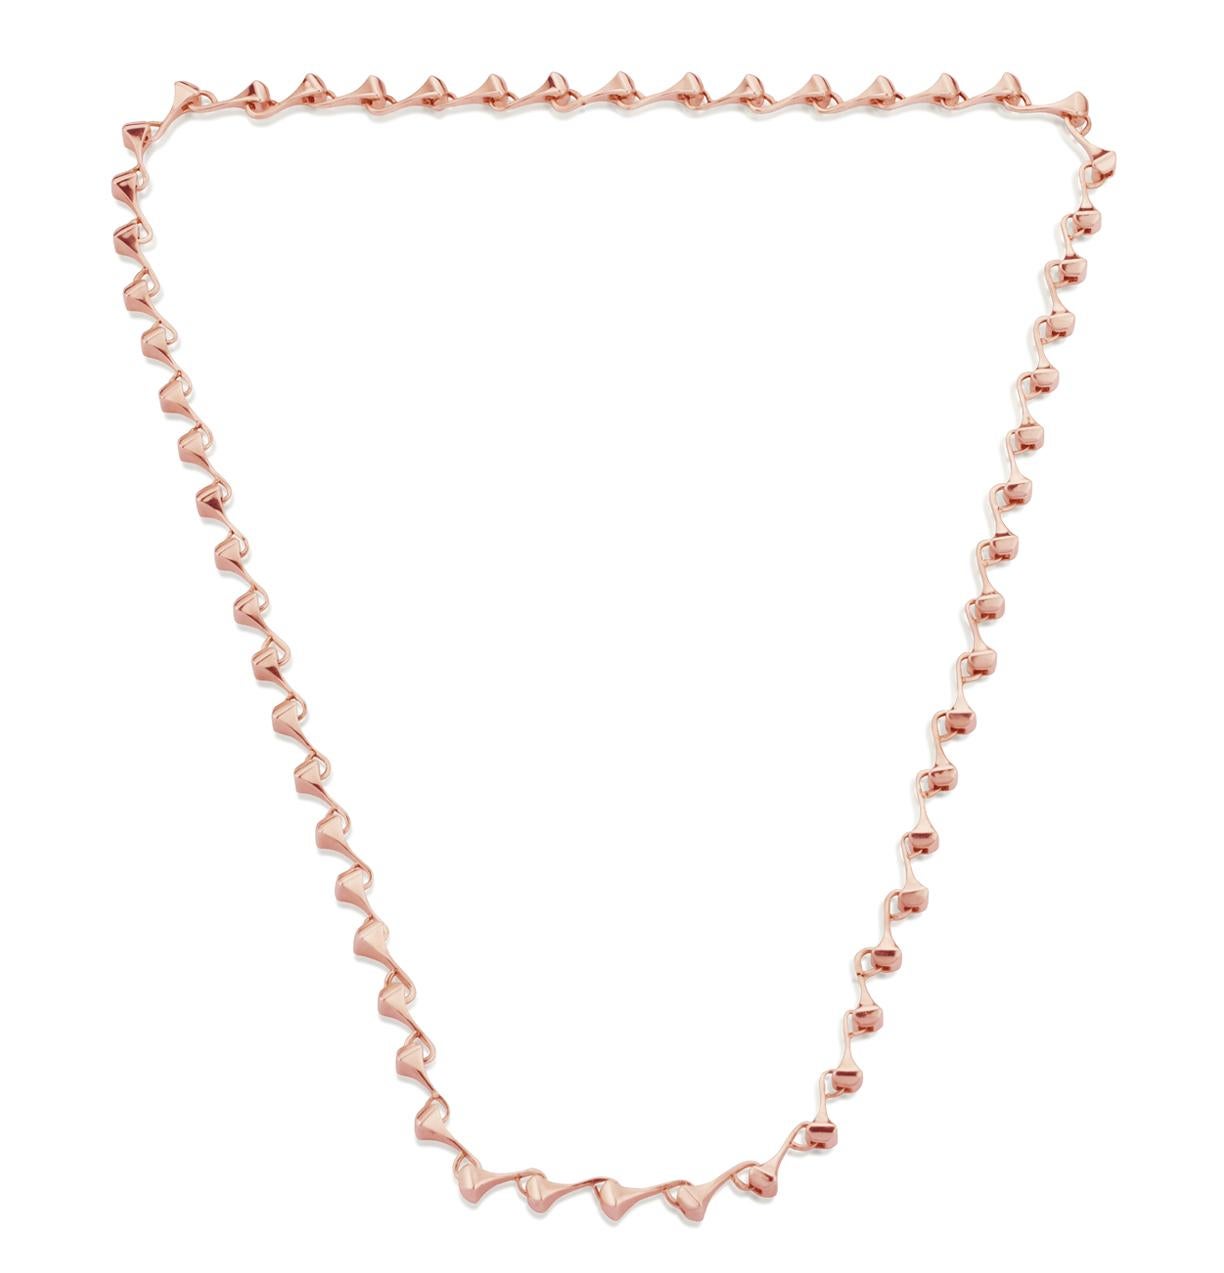 Long chain necklace in solid rose gold. The design has a Rock ‘n’ Roll vibe and it is inspired by the equestrian world, as the links of the necklace have a shape which reminds the horseshoe nails. This collection is also influenced by the horned